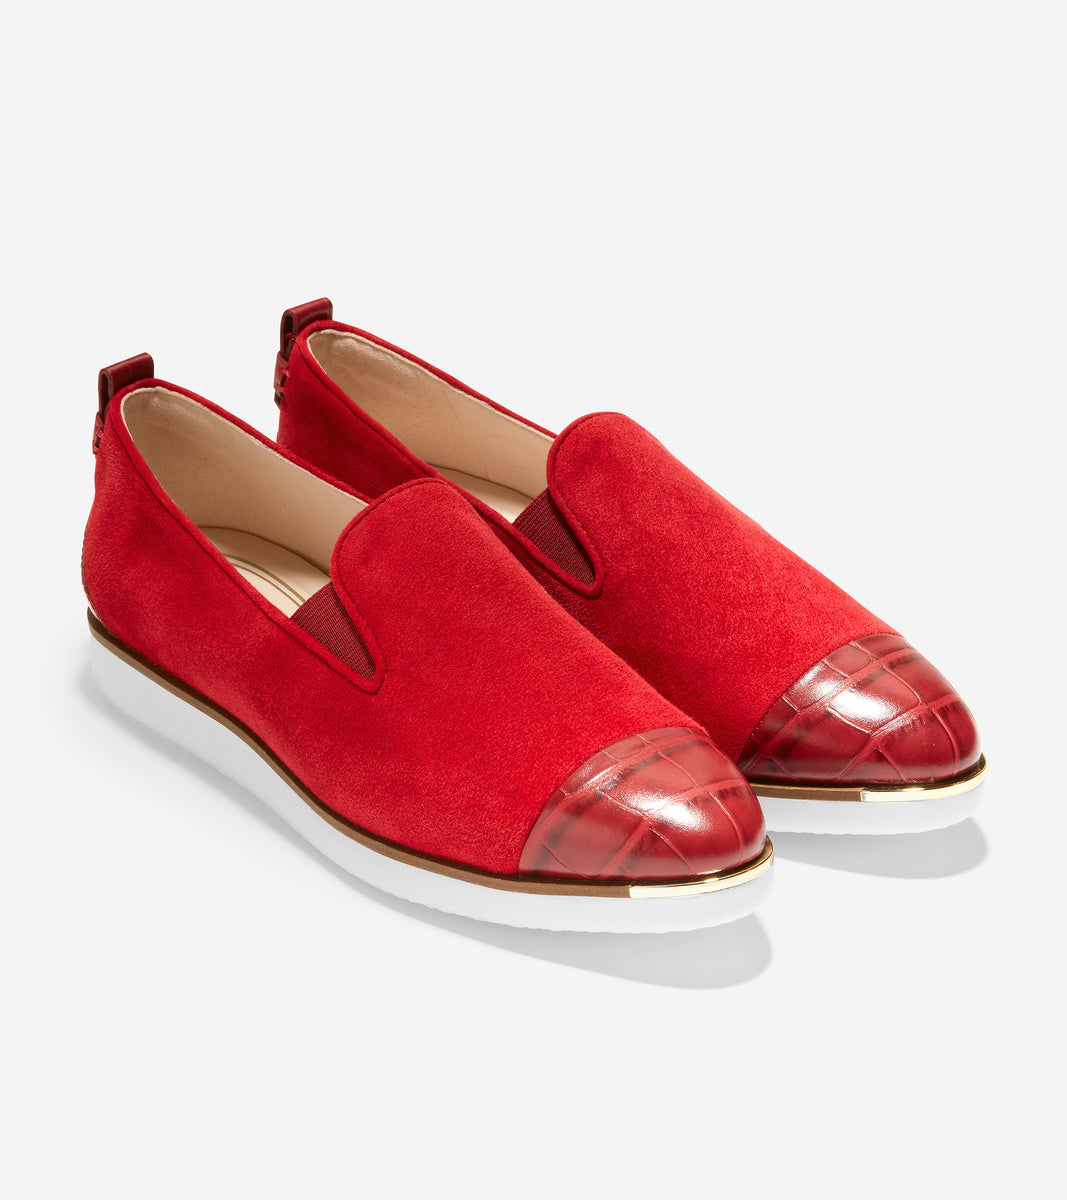 ColeHaan-Grand Ambition Slip-On Sneaker-w20498-Red Dahlia Suede-Red Croc Print